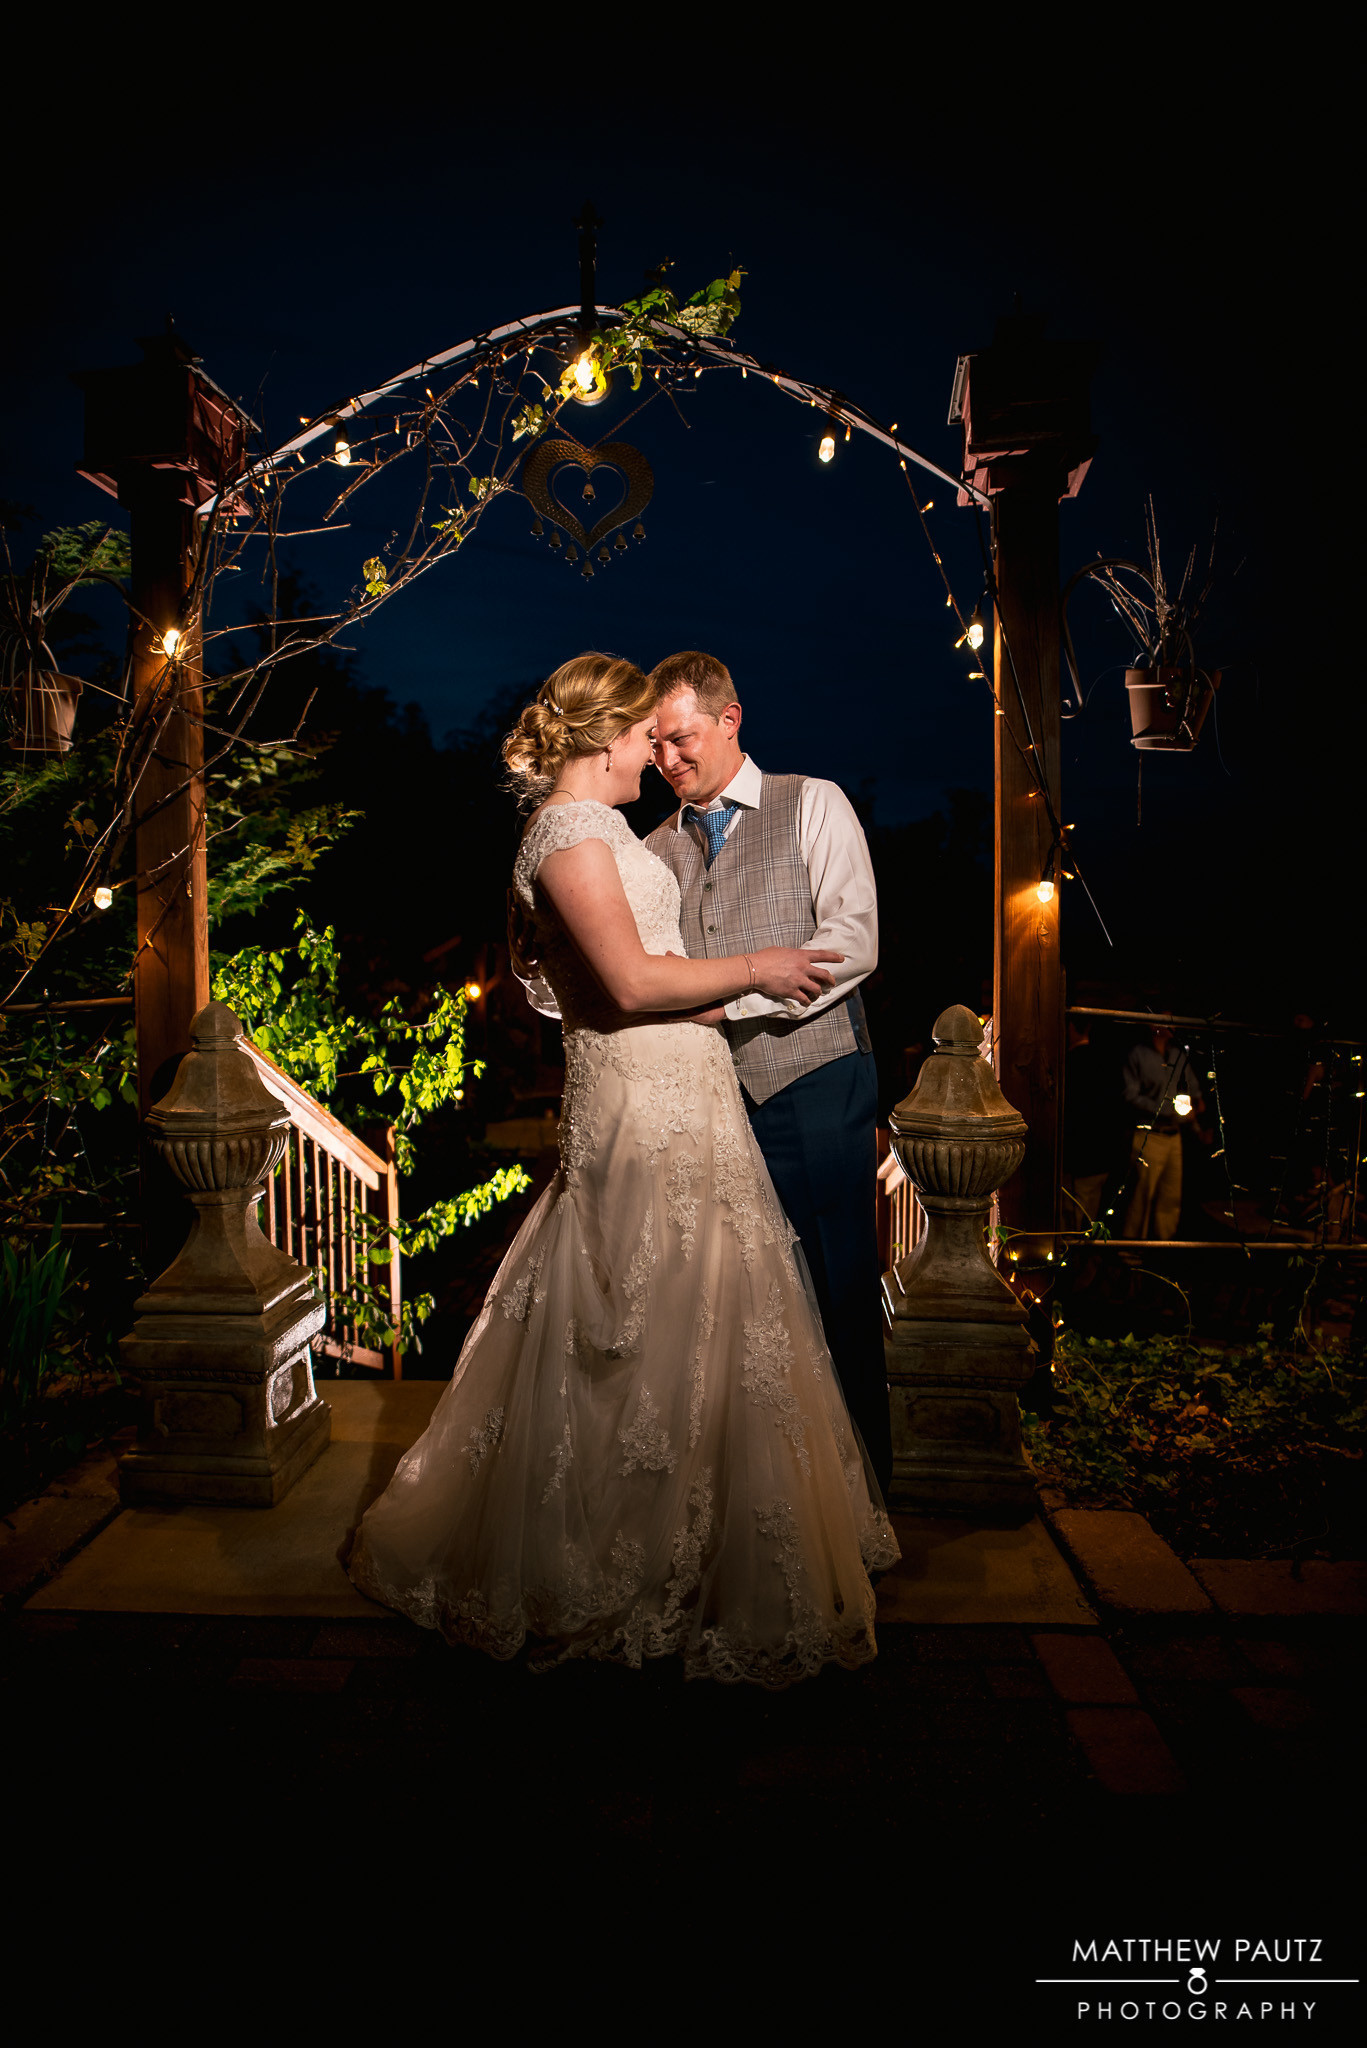  Matthew Pautz truly out did himself in capturing these evening couple photos. 